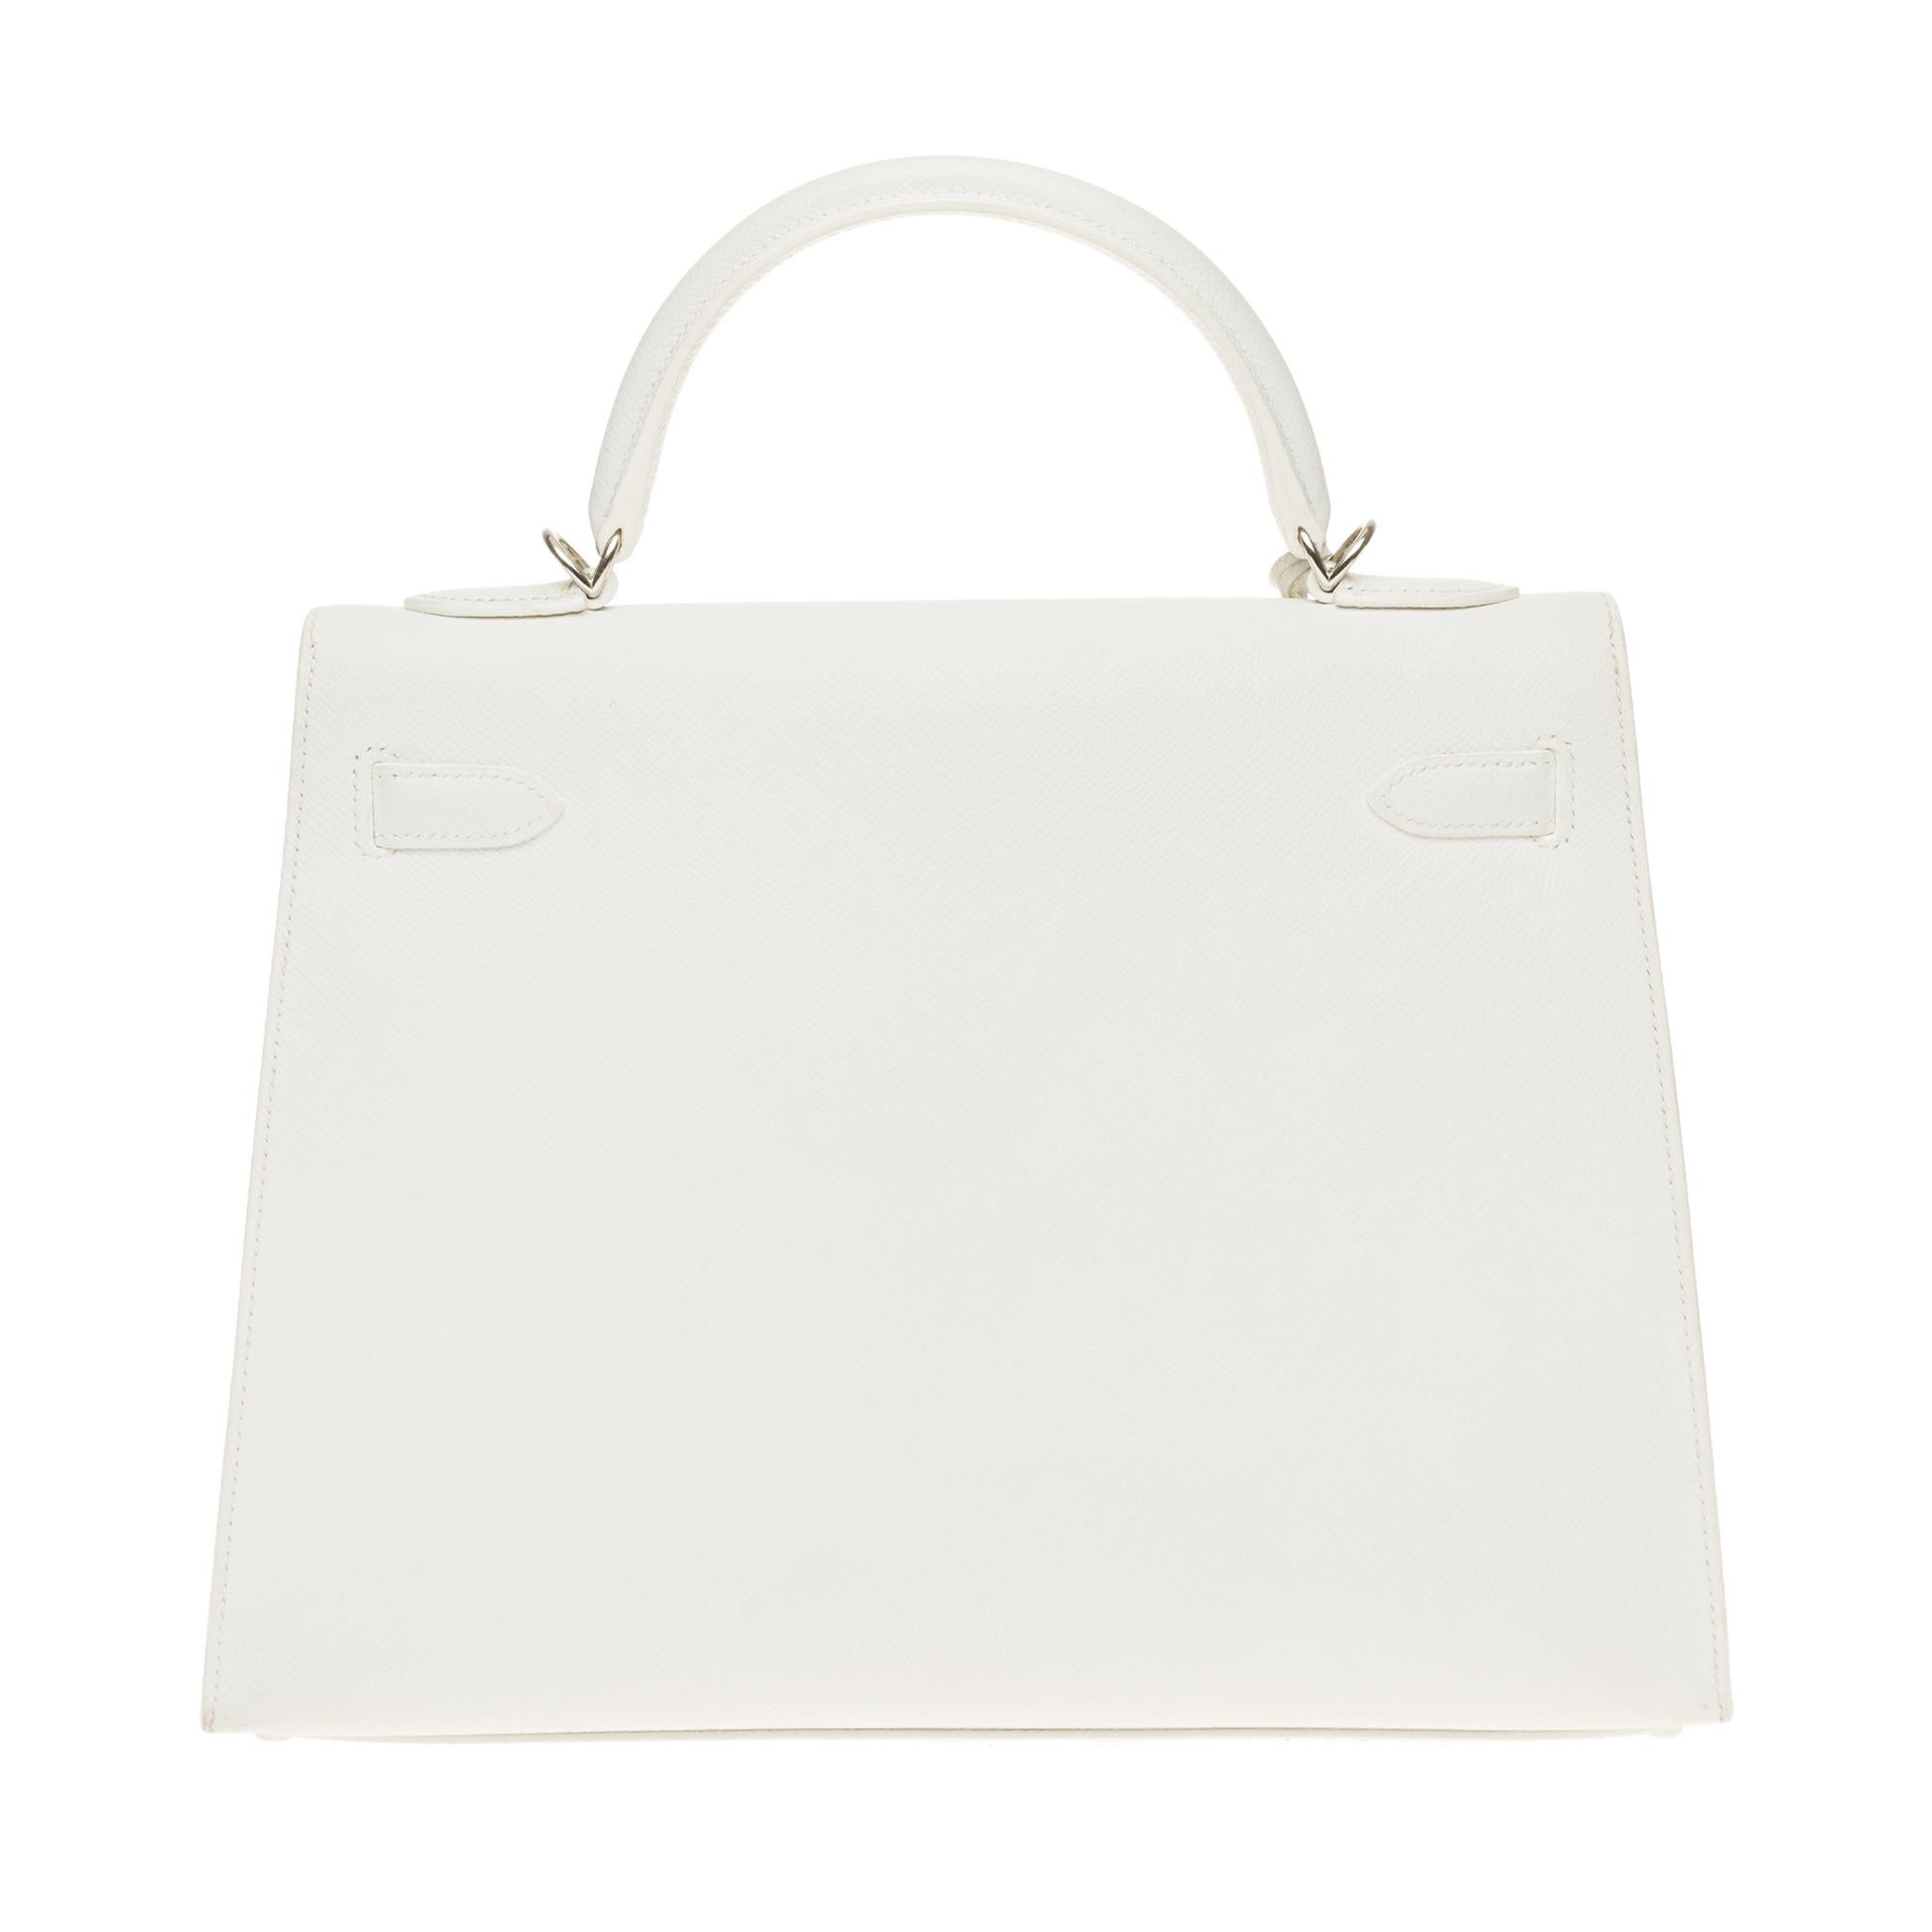 Hermes Kelly Handbag 32 cm in Epsom White leather, Palladium metal trim, white saddle stitches, simple white leather handle, removable white leather shoulder strap handle for carrying hand or shoulder

Closure by flap
White leather inner lining, one